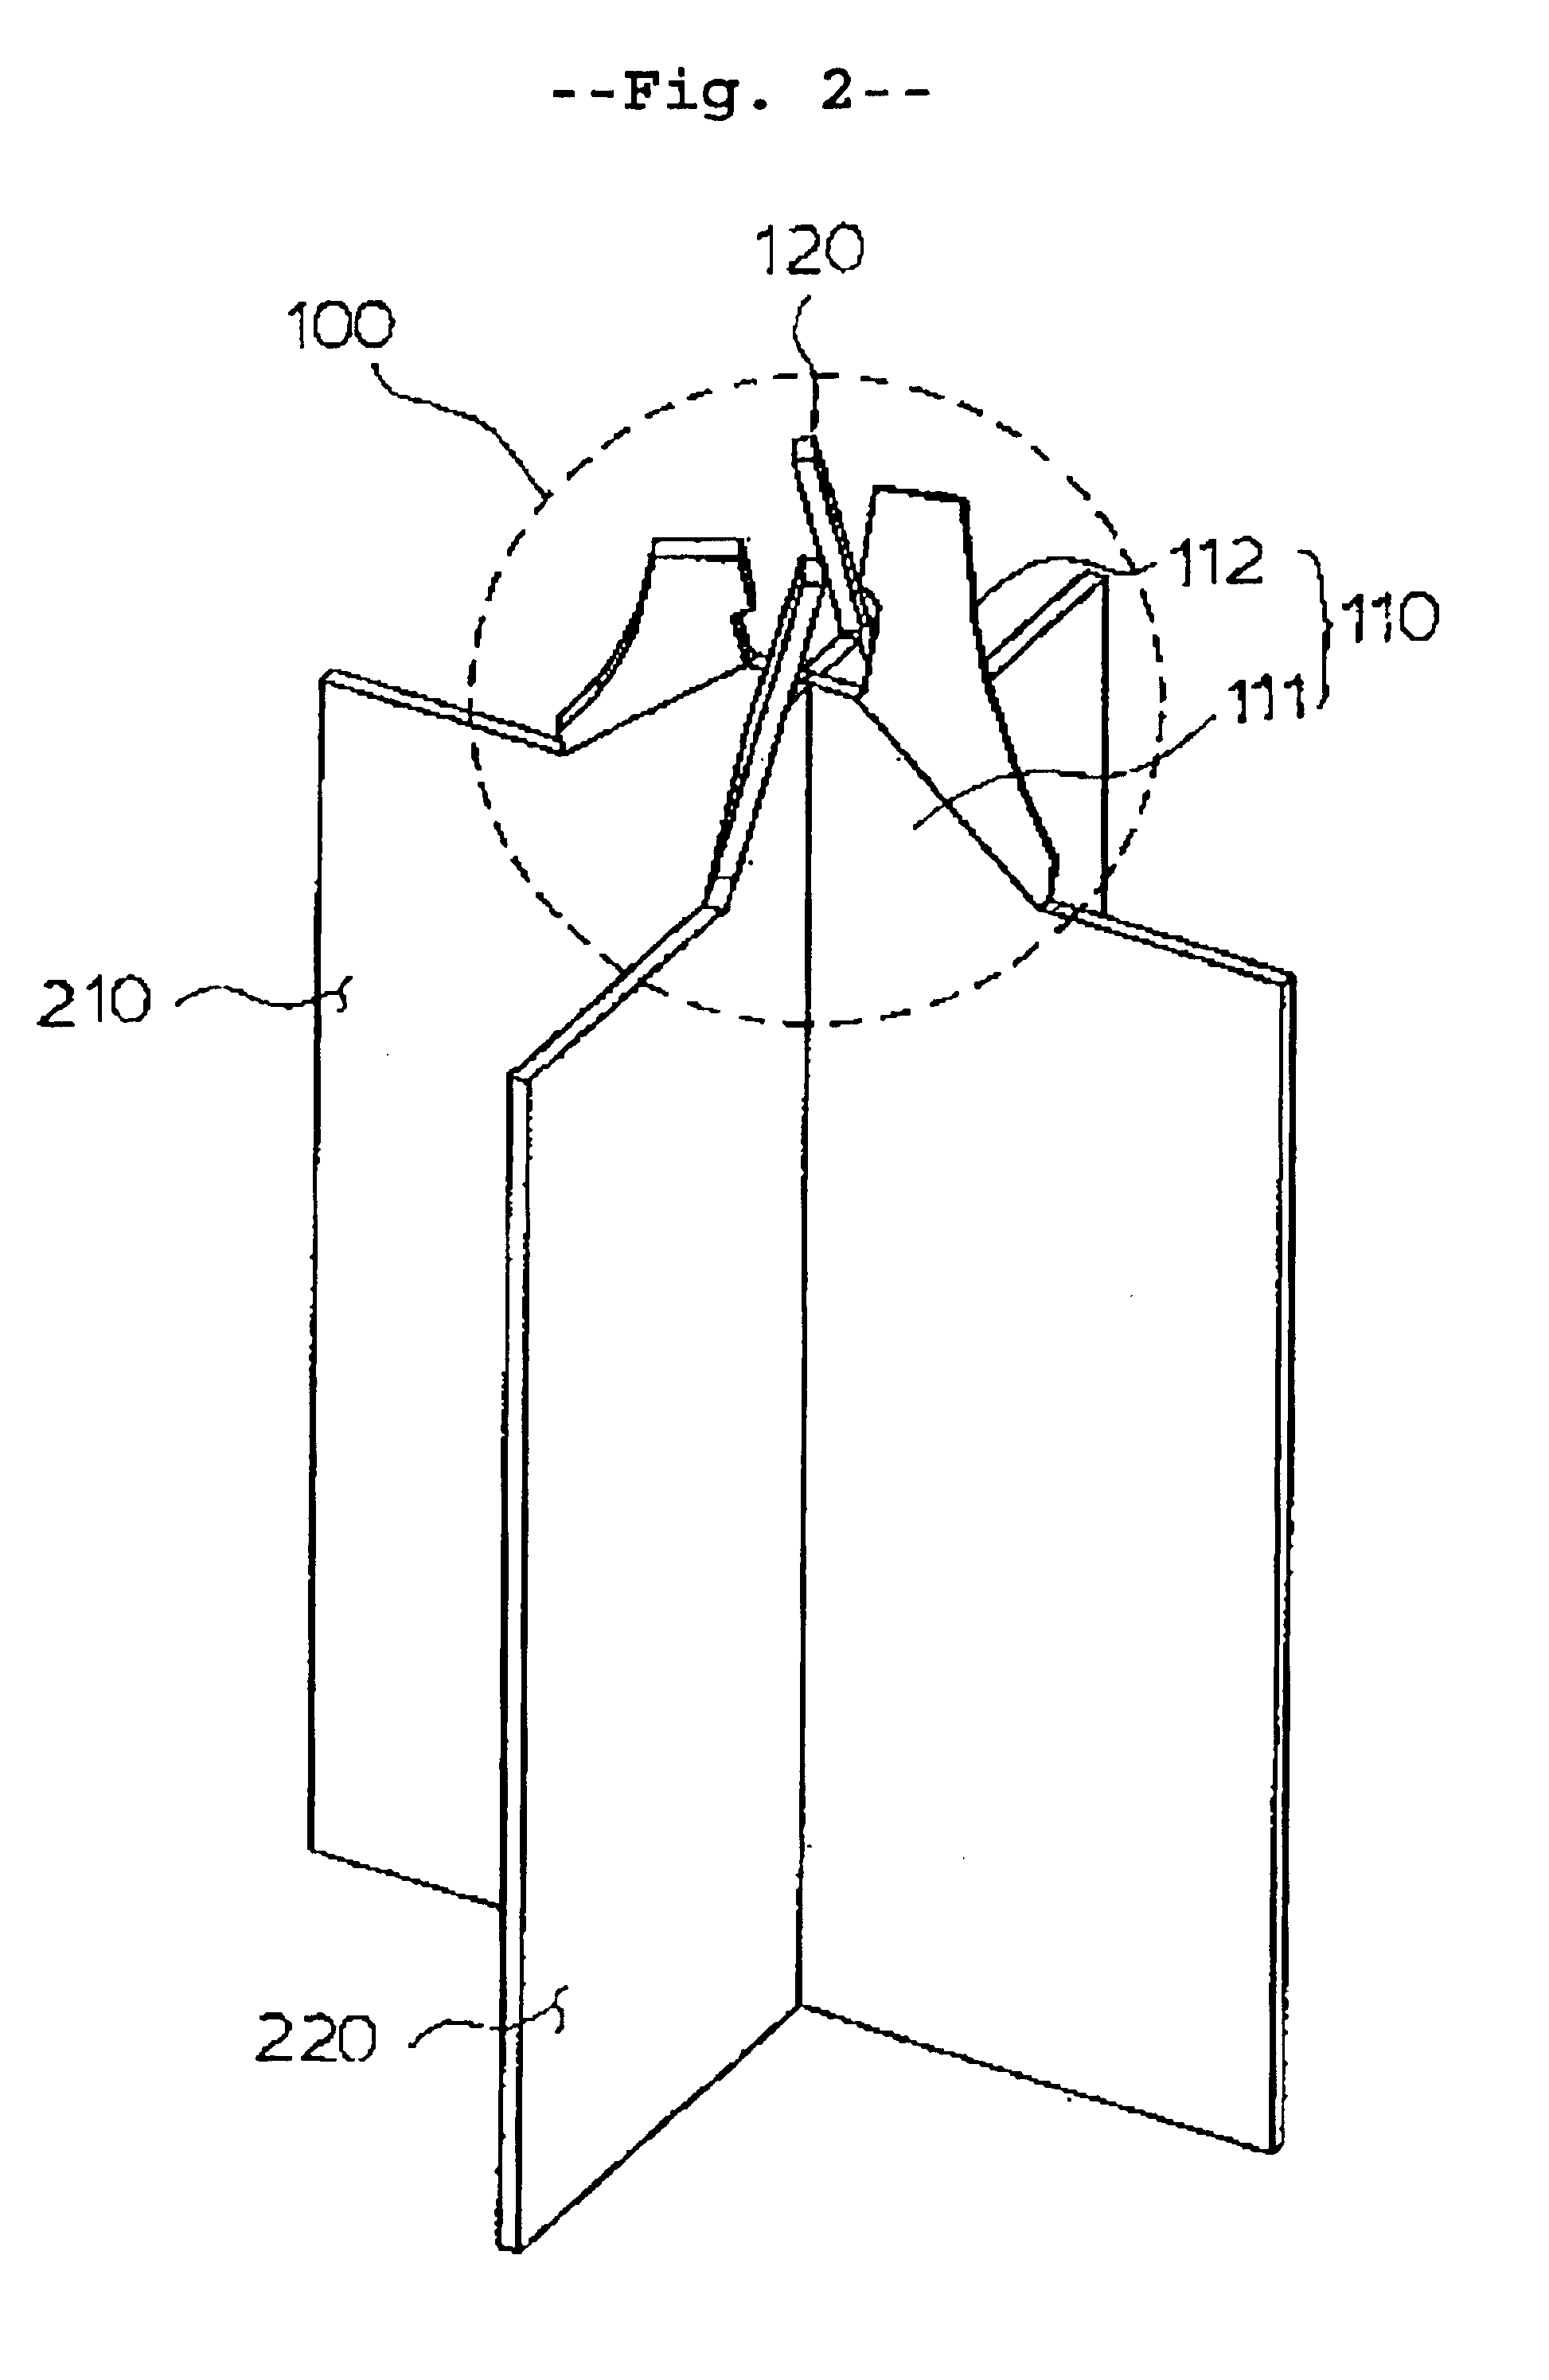 Spacer grid with hybrid flow-mixing device for nuclear fuel assembly